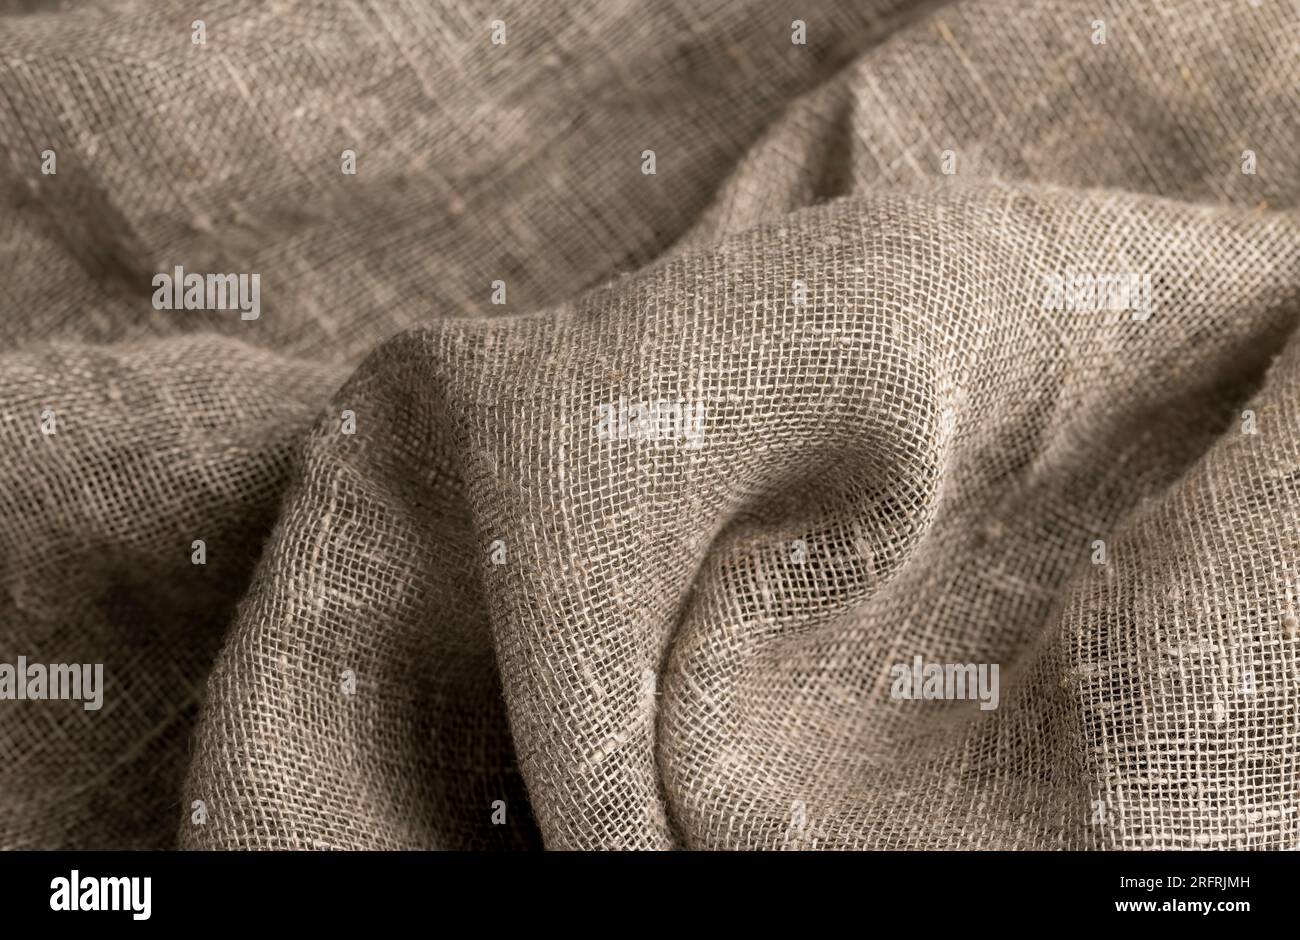 Soft linen fabric for sewing clothes Stock Photo - Alamy